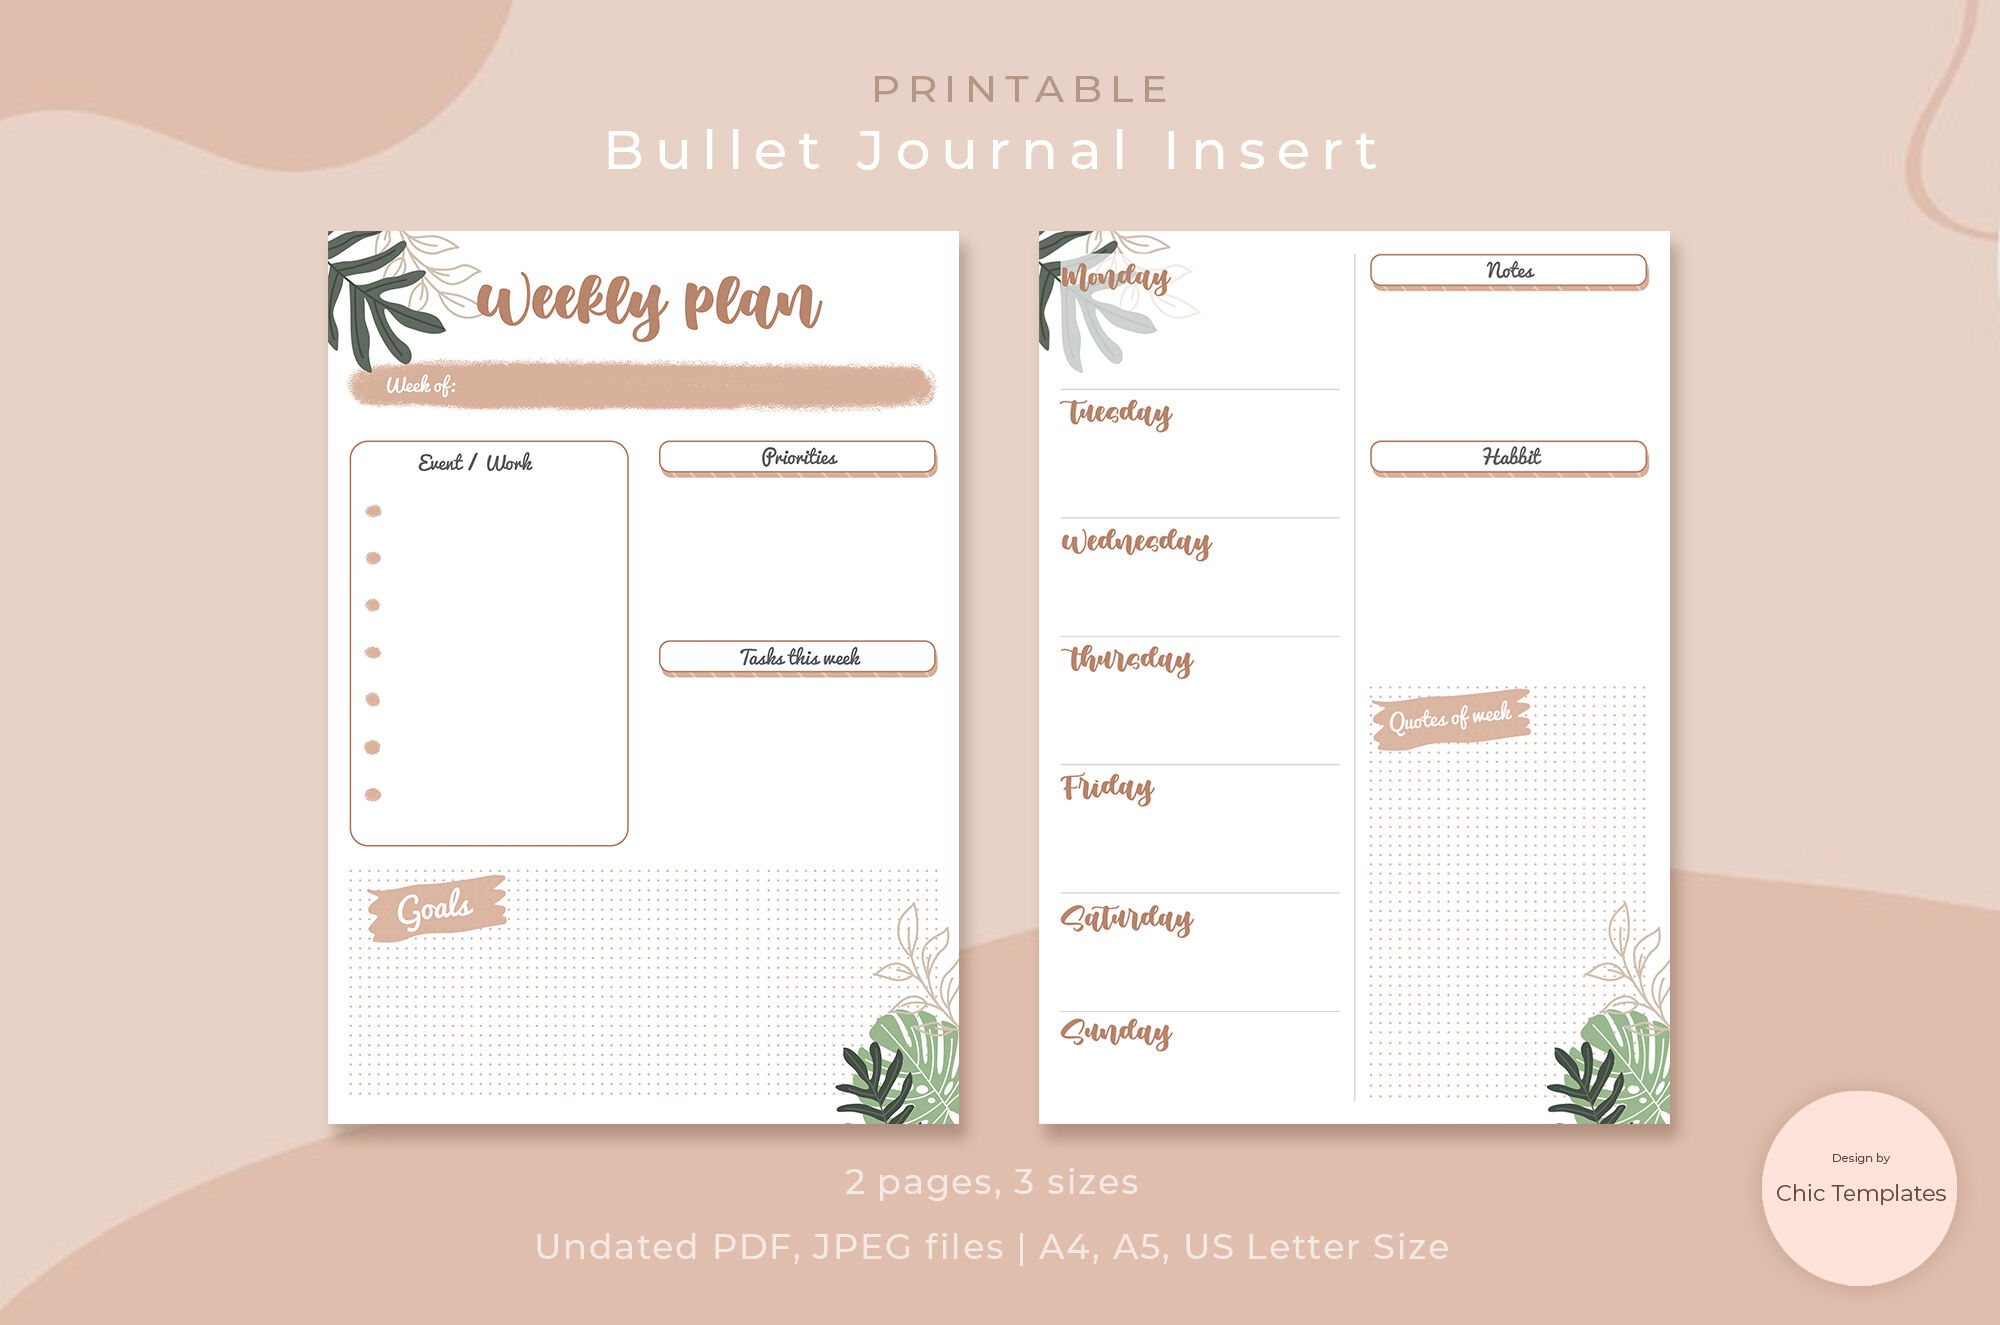 Premium Vector  Wish list elements for bullet journal. page